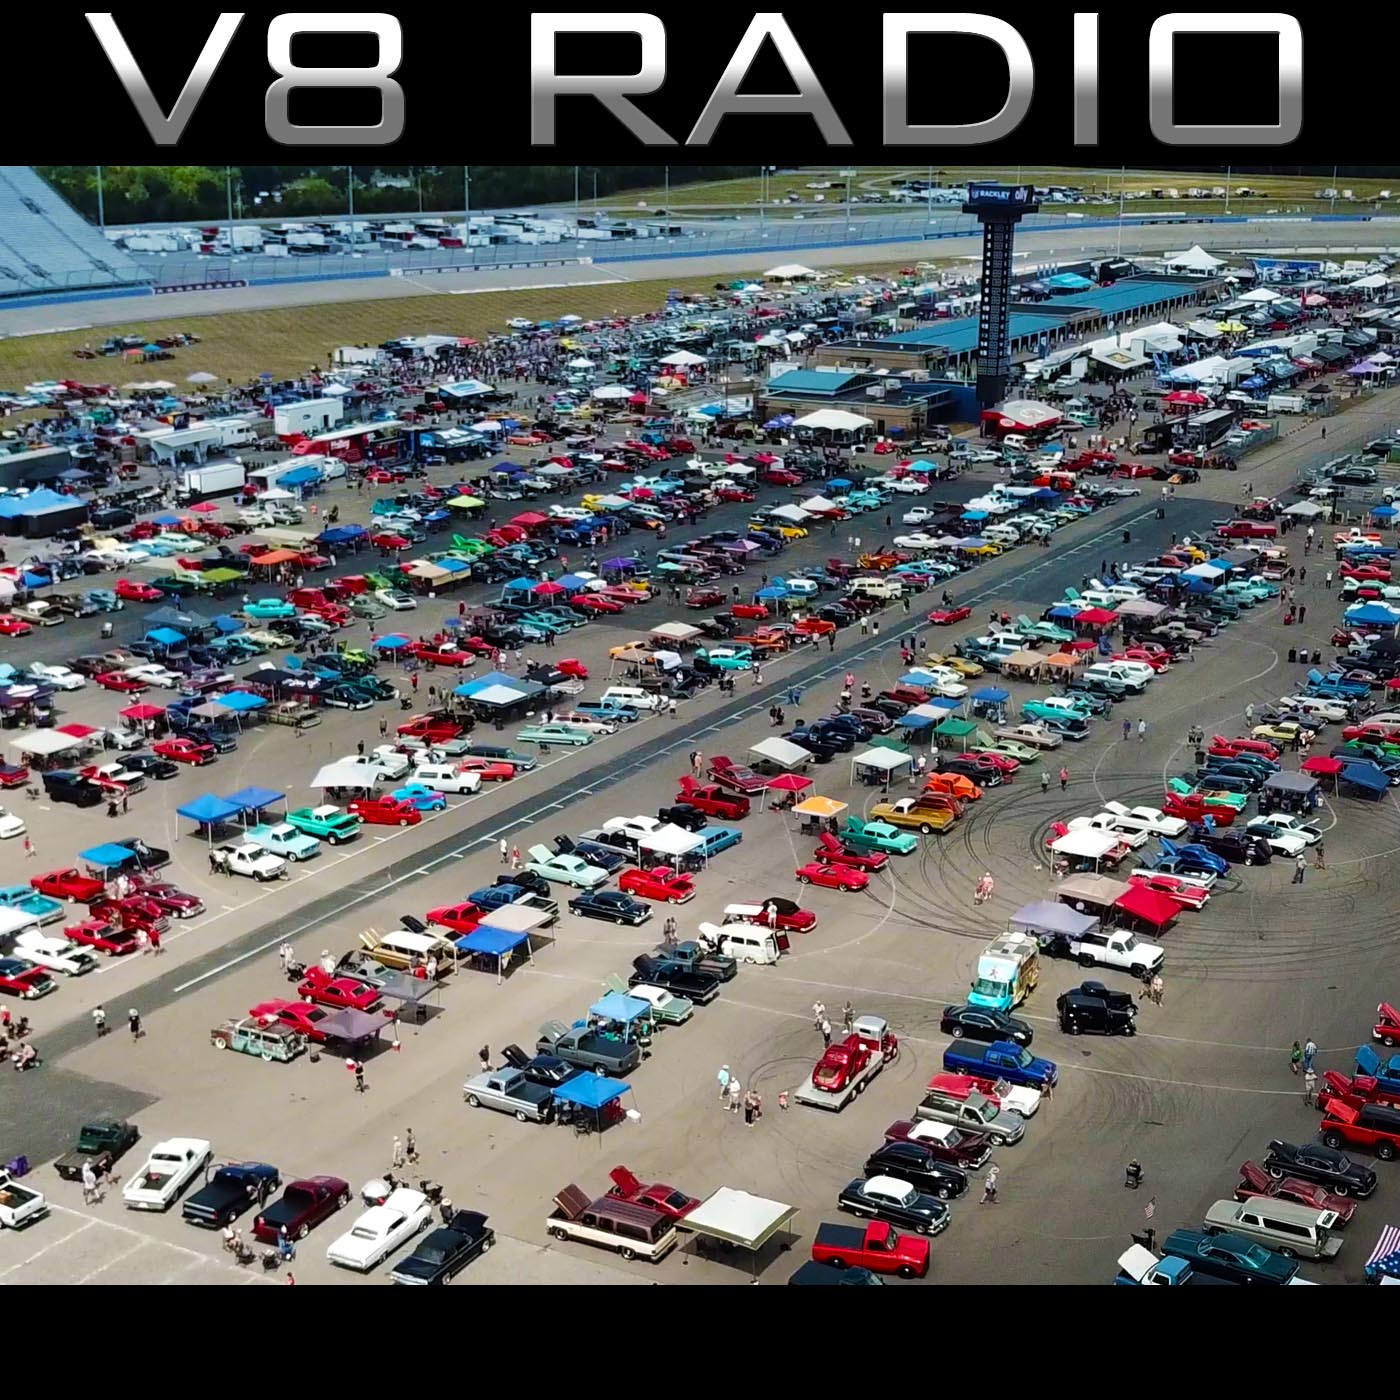 Triple Crown of Rodding Recap, Billy Gibbons ZZTop Concert, Automotive Trivia, and Much More on the V8 Radio Podcast!